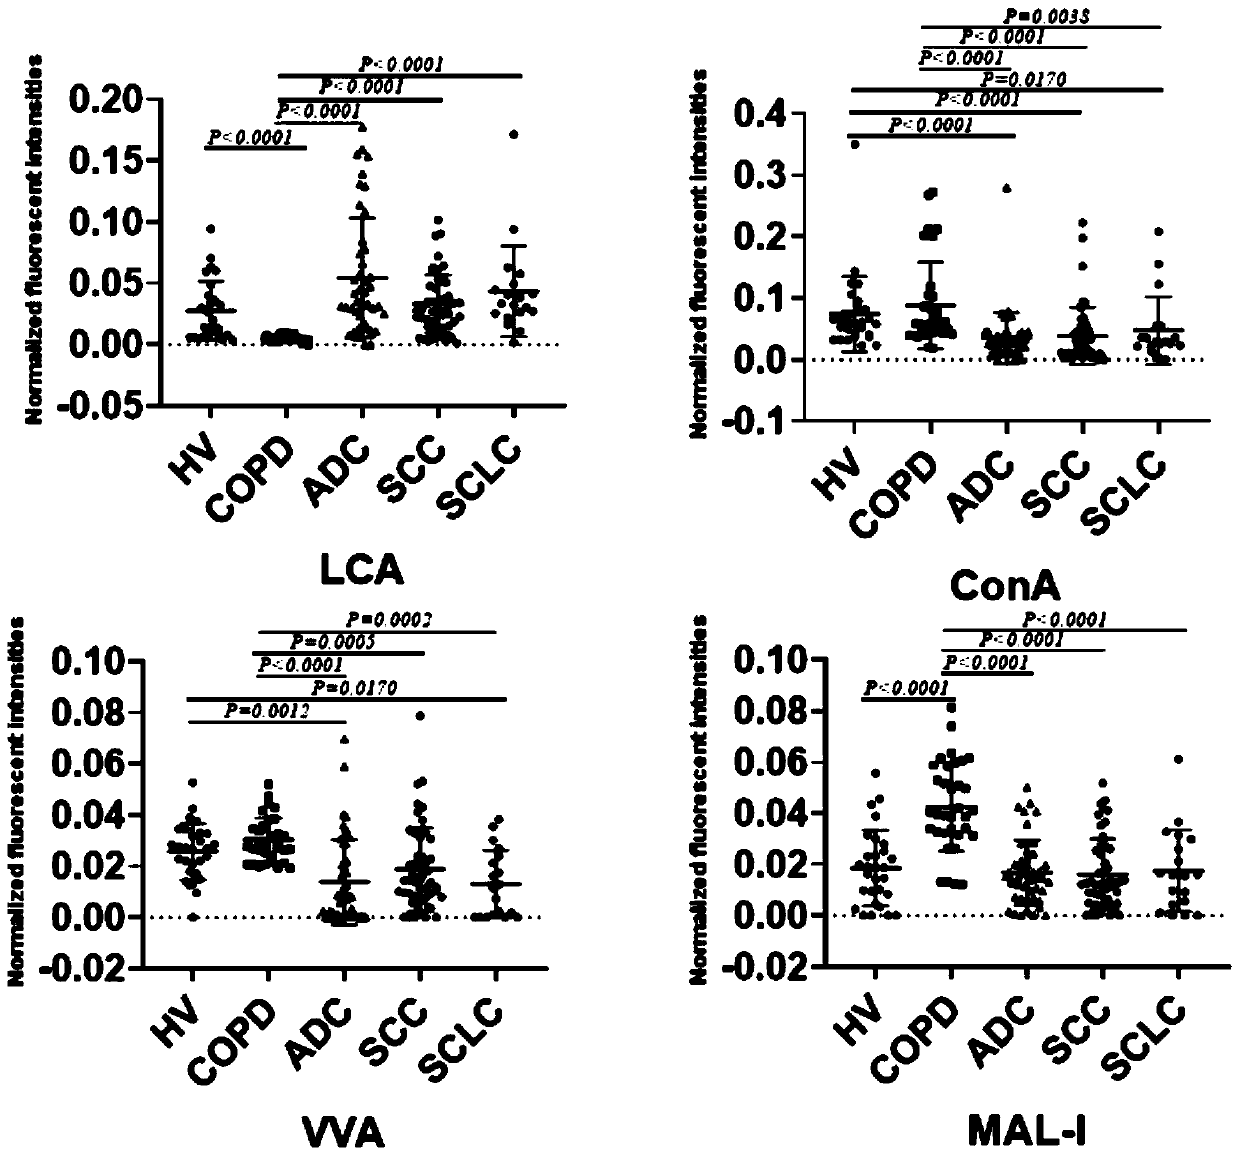 Application of specific lectin combination in construction of test tool for identifying adenocarcinoma in lung cancer based on saliva glycoprotein carbohydrate chains